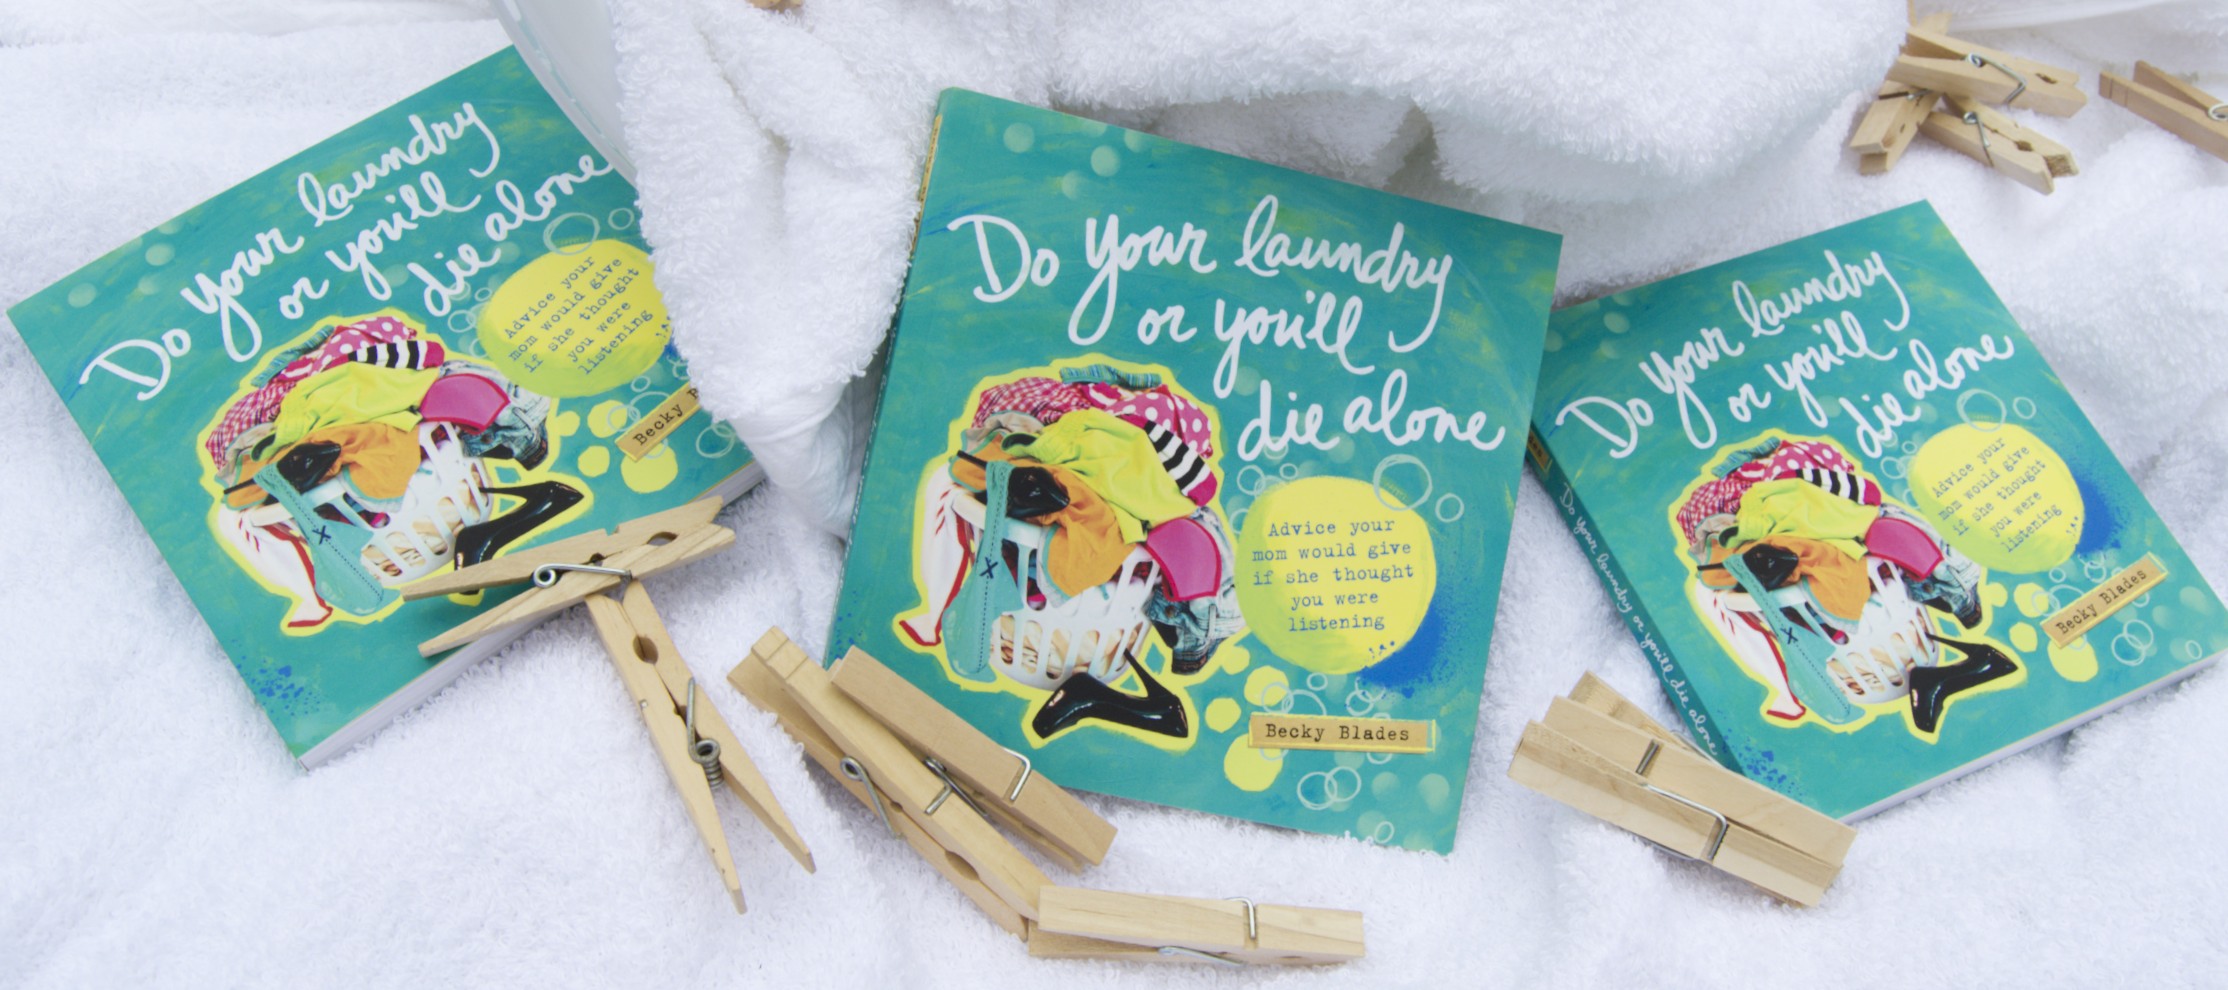 do your laundry or you'll die alone books on towels and clothespins